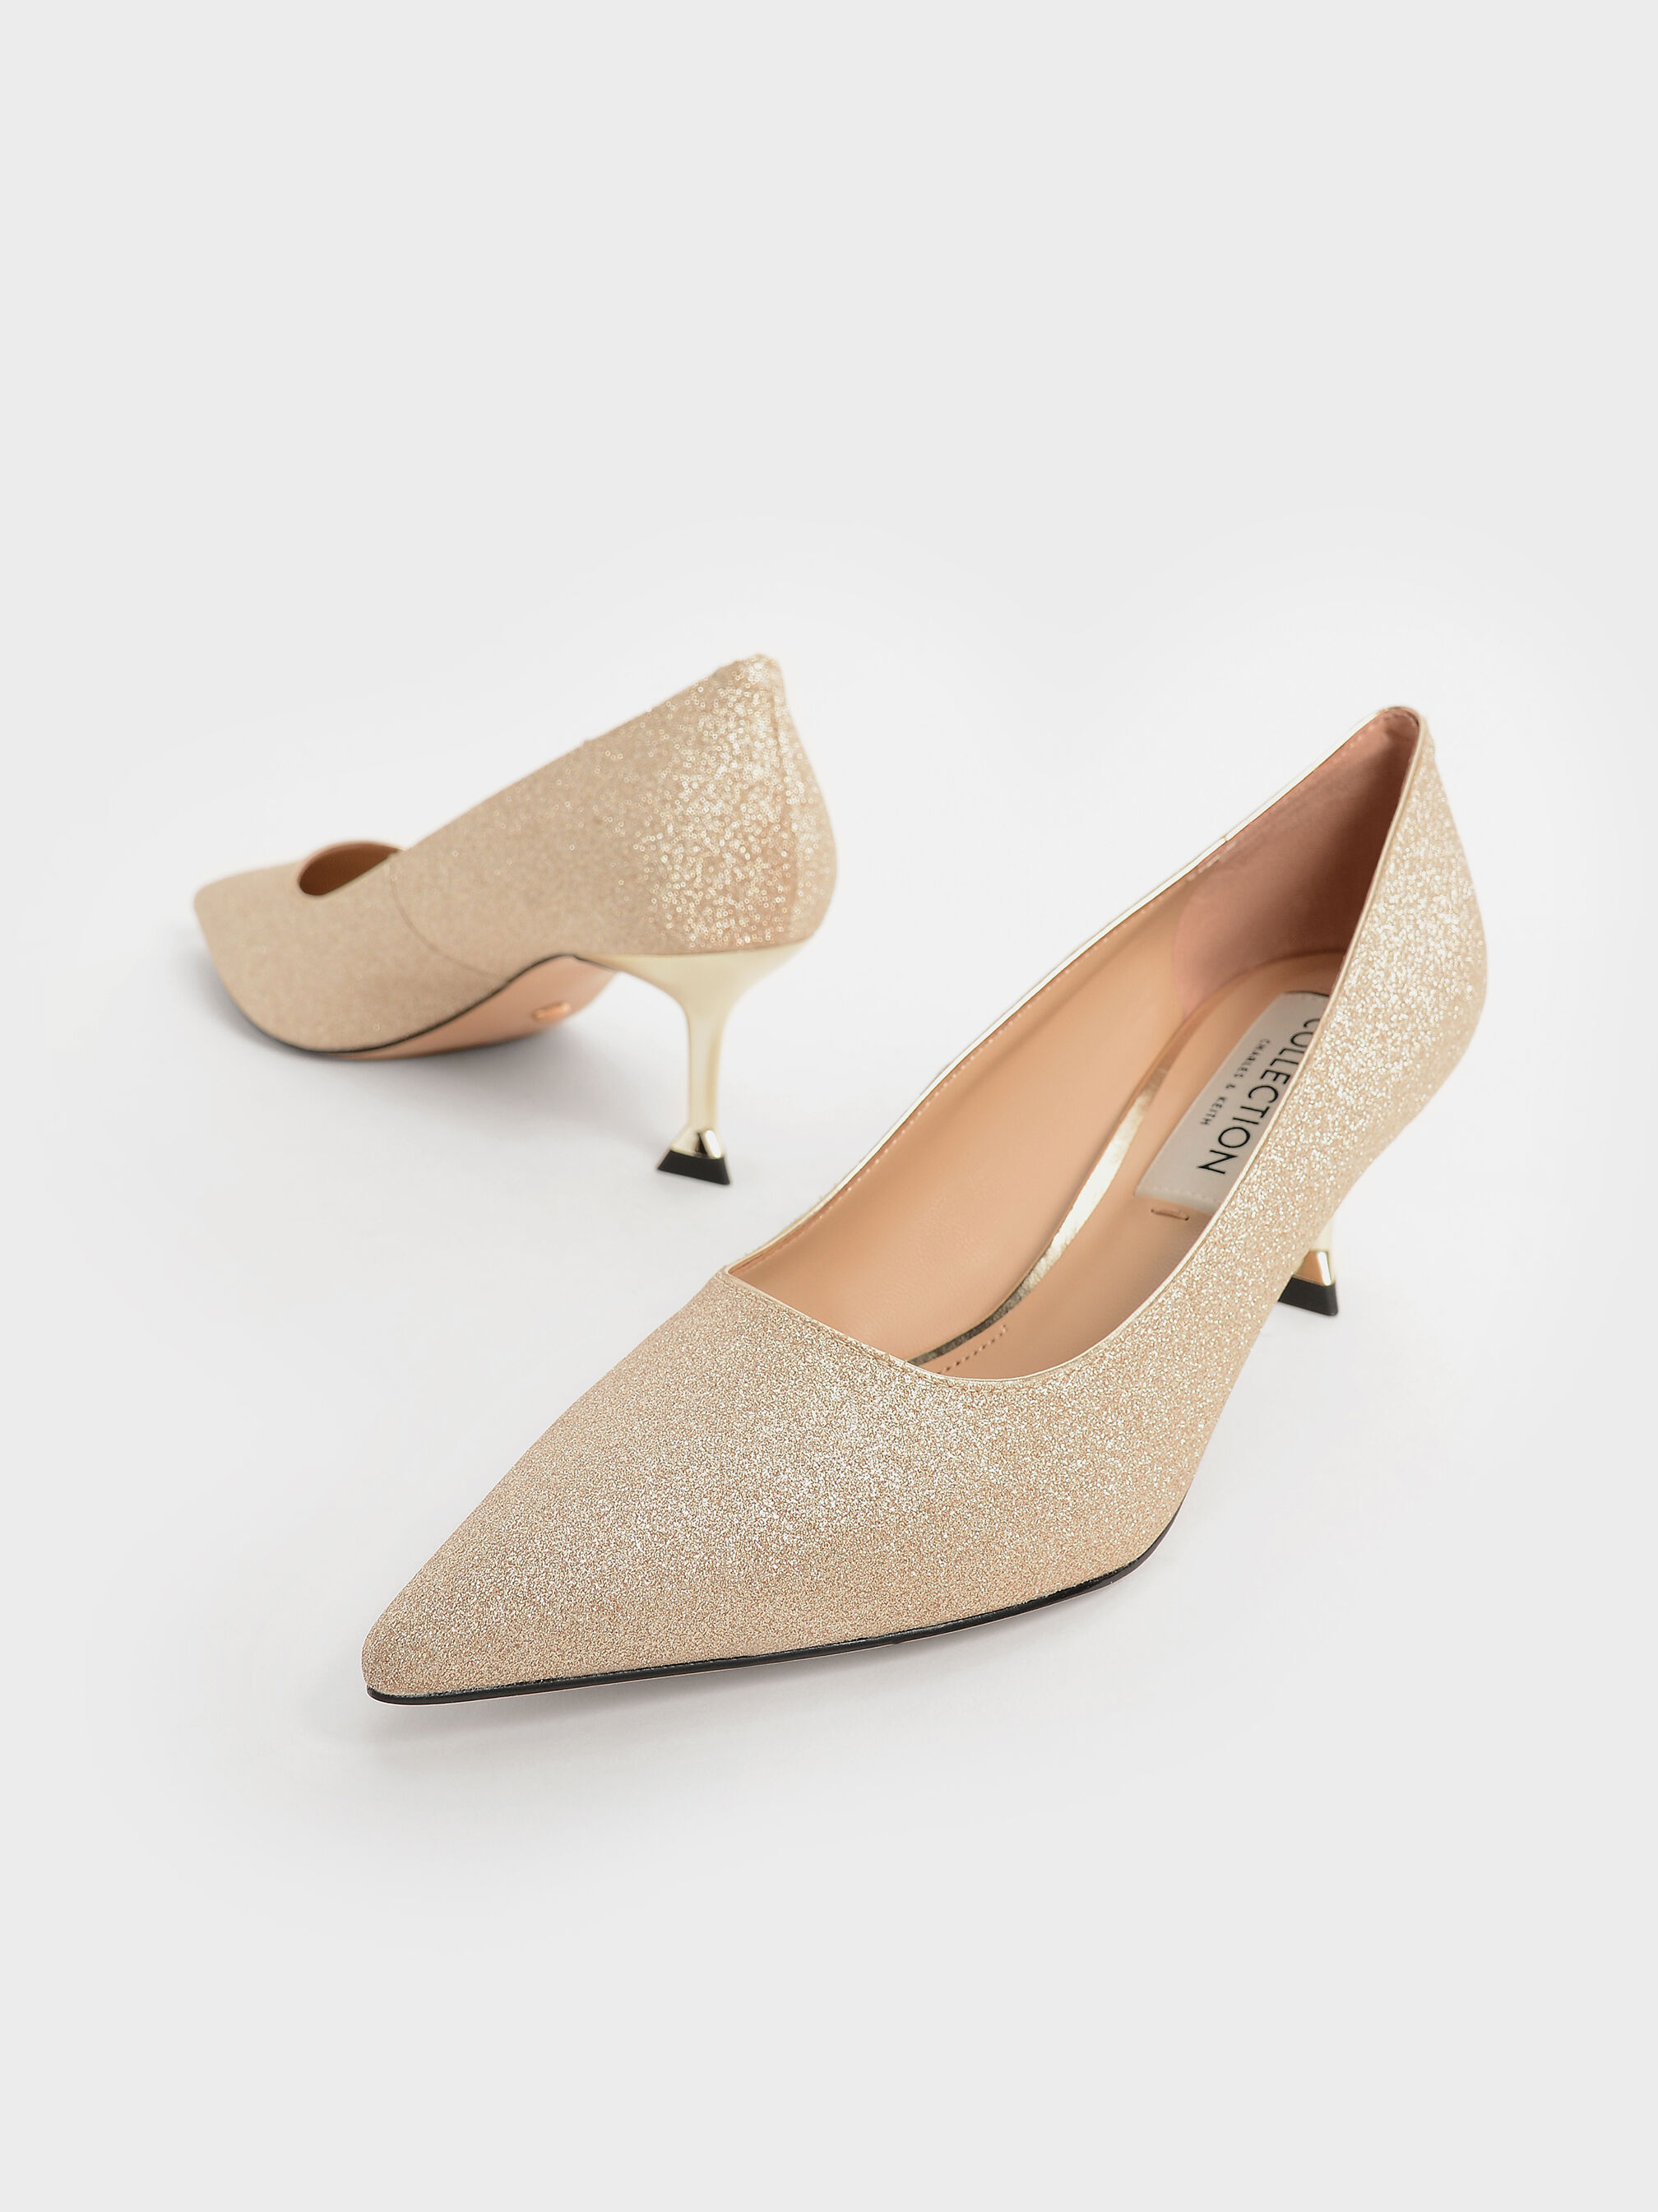 Missionaris acre Collega Gold Glittered Kitten Heel Pumps - CHARLES & KEITH US